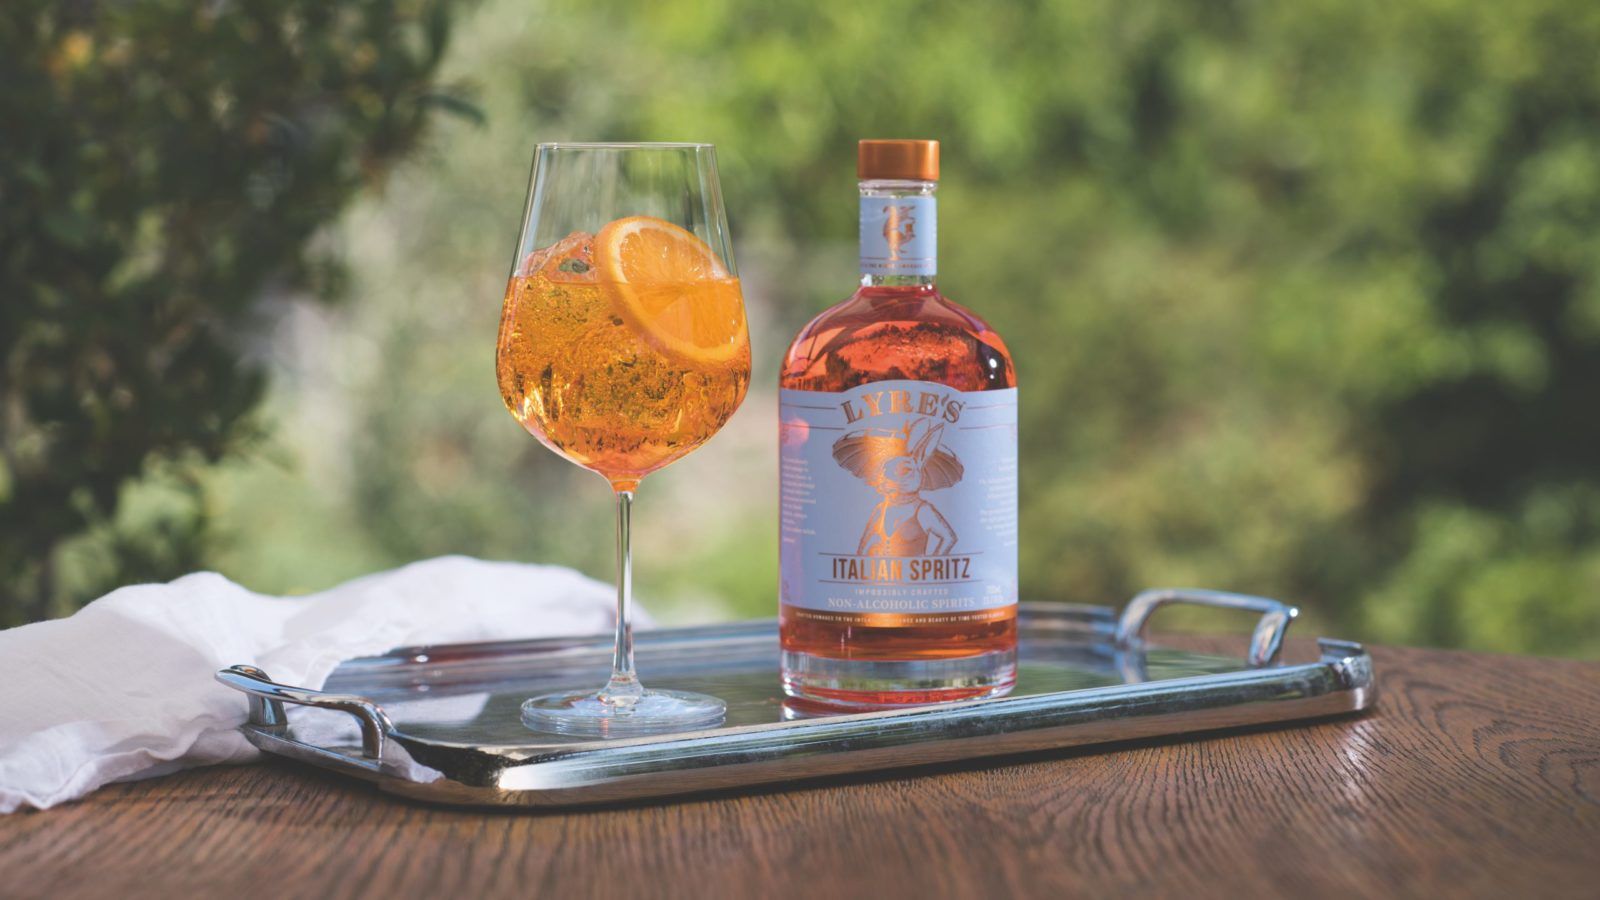 Lyre’s non-alcoholic spirit range is made to taste exactly like real booze